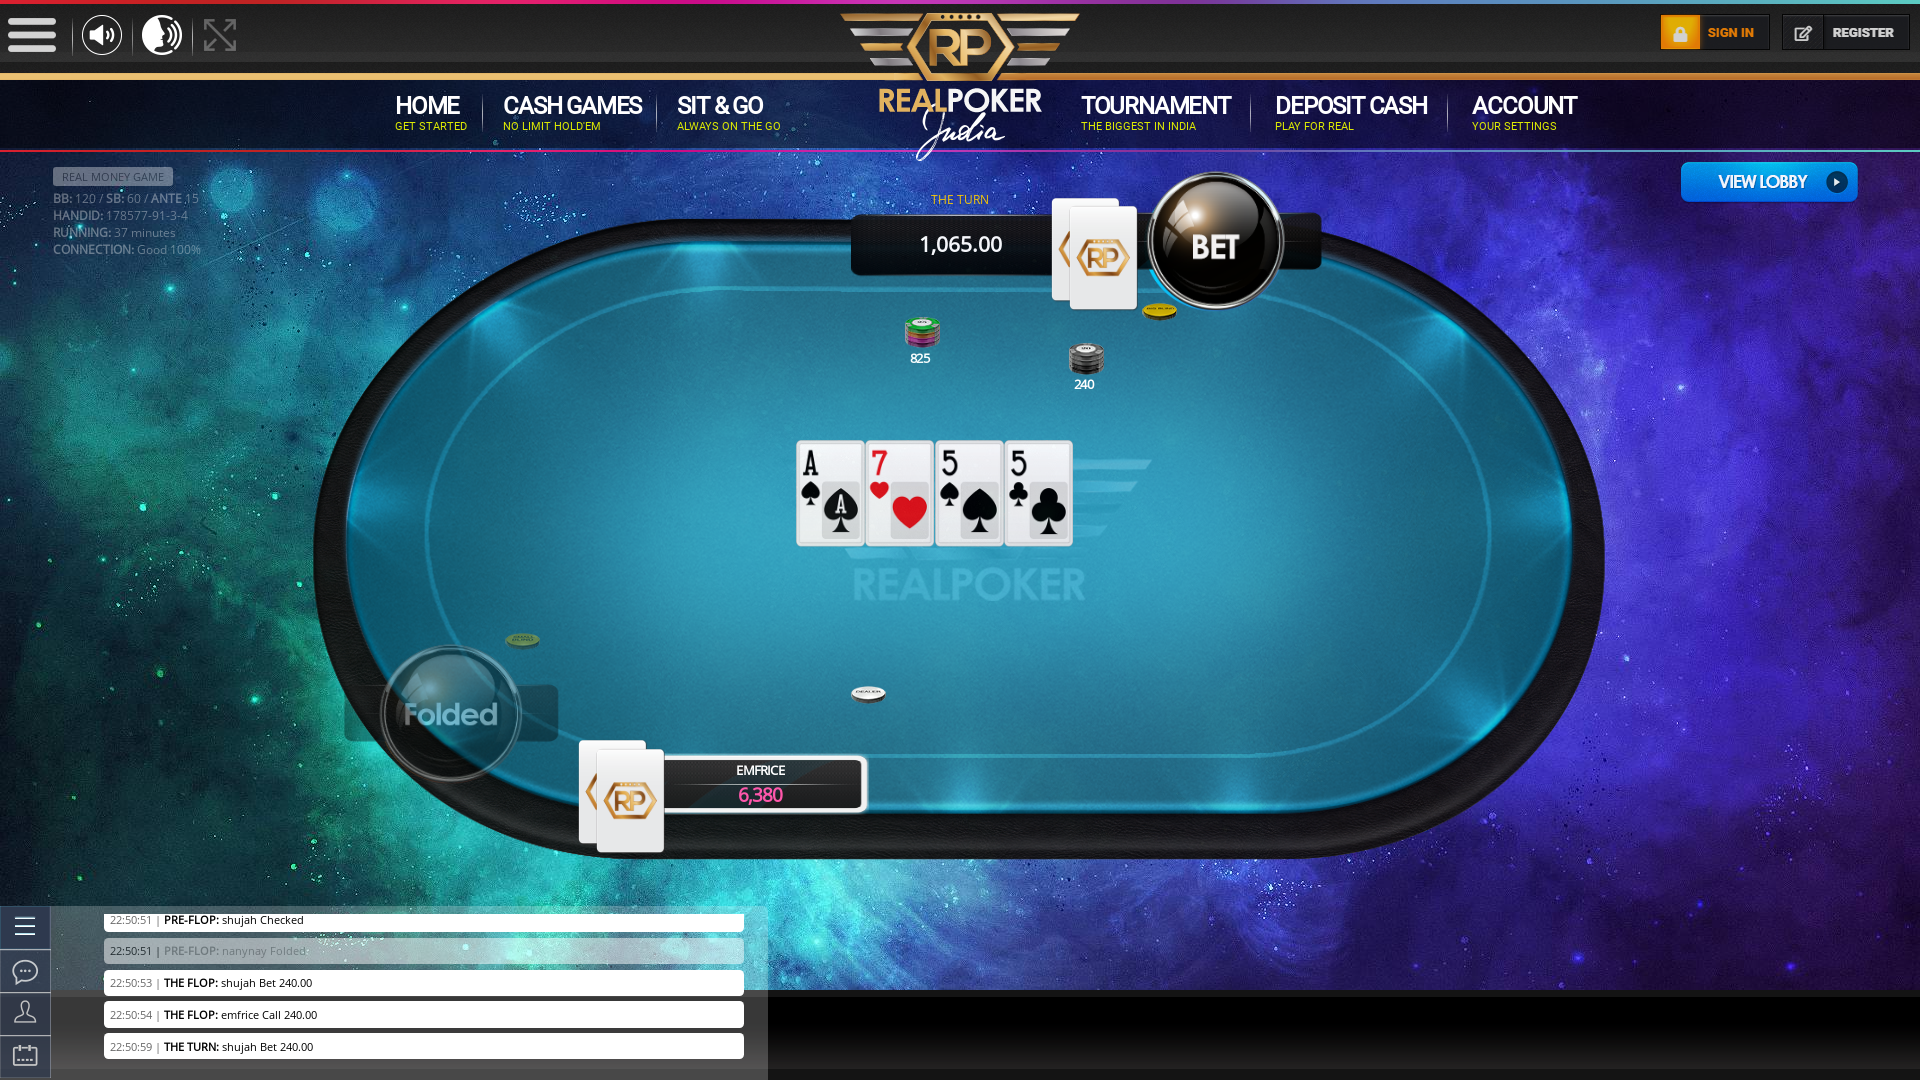 10 player texas holdem table at real poker with the table id 178577